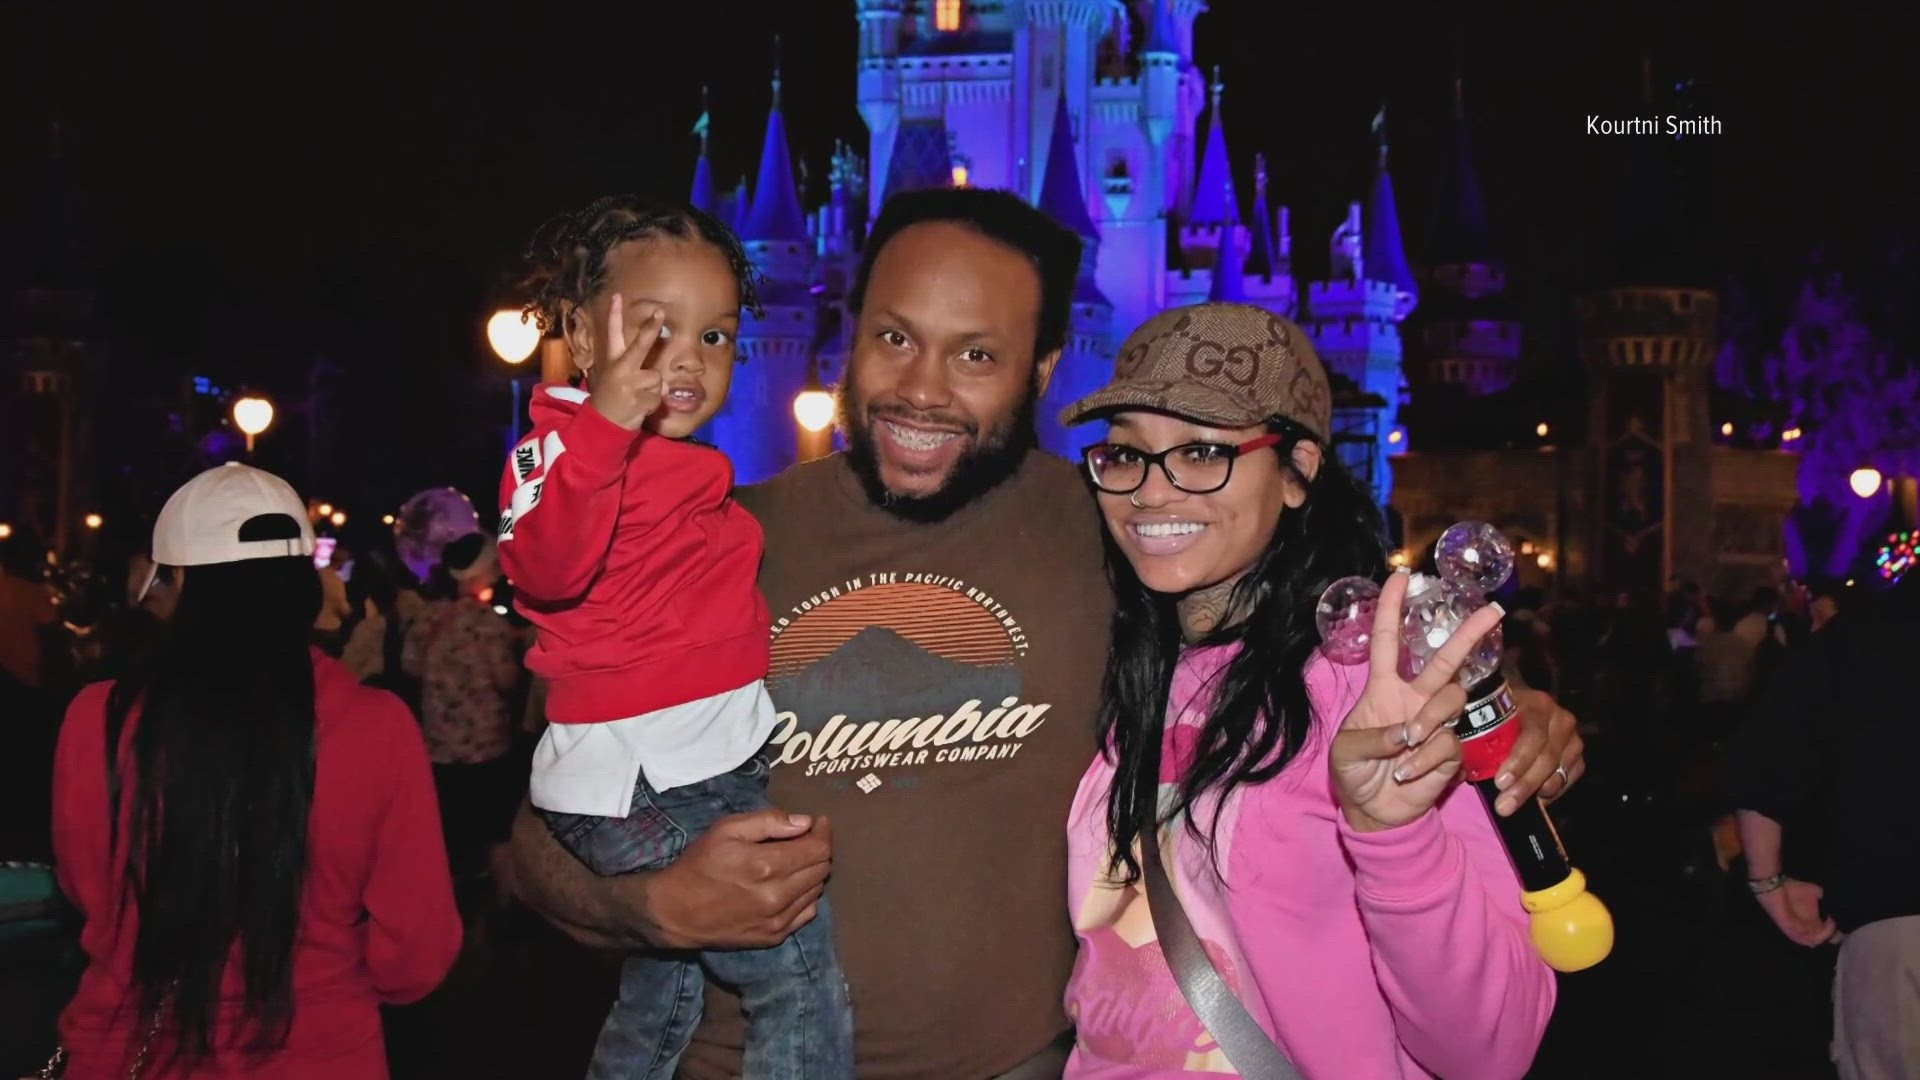 Kourtni Smith celebrated Christmas with her family in Florida at Disney World. The day was especially joyful because her doctors said she wouldn't live to see it.